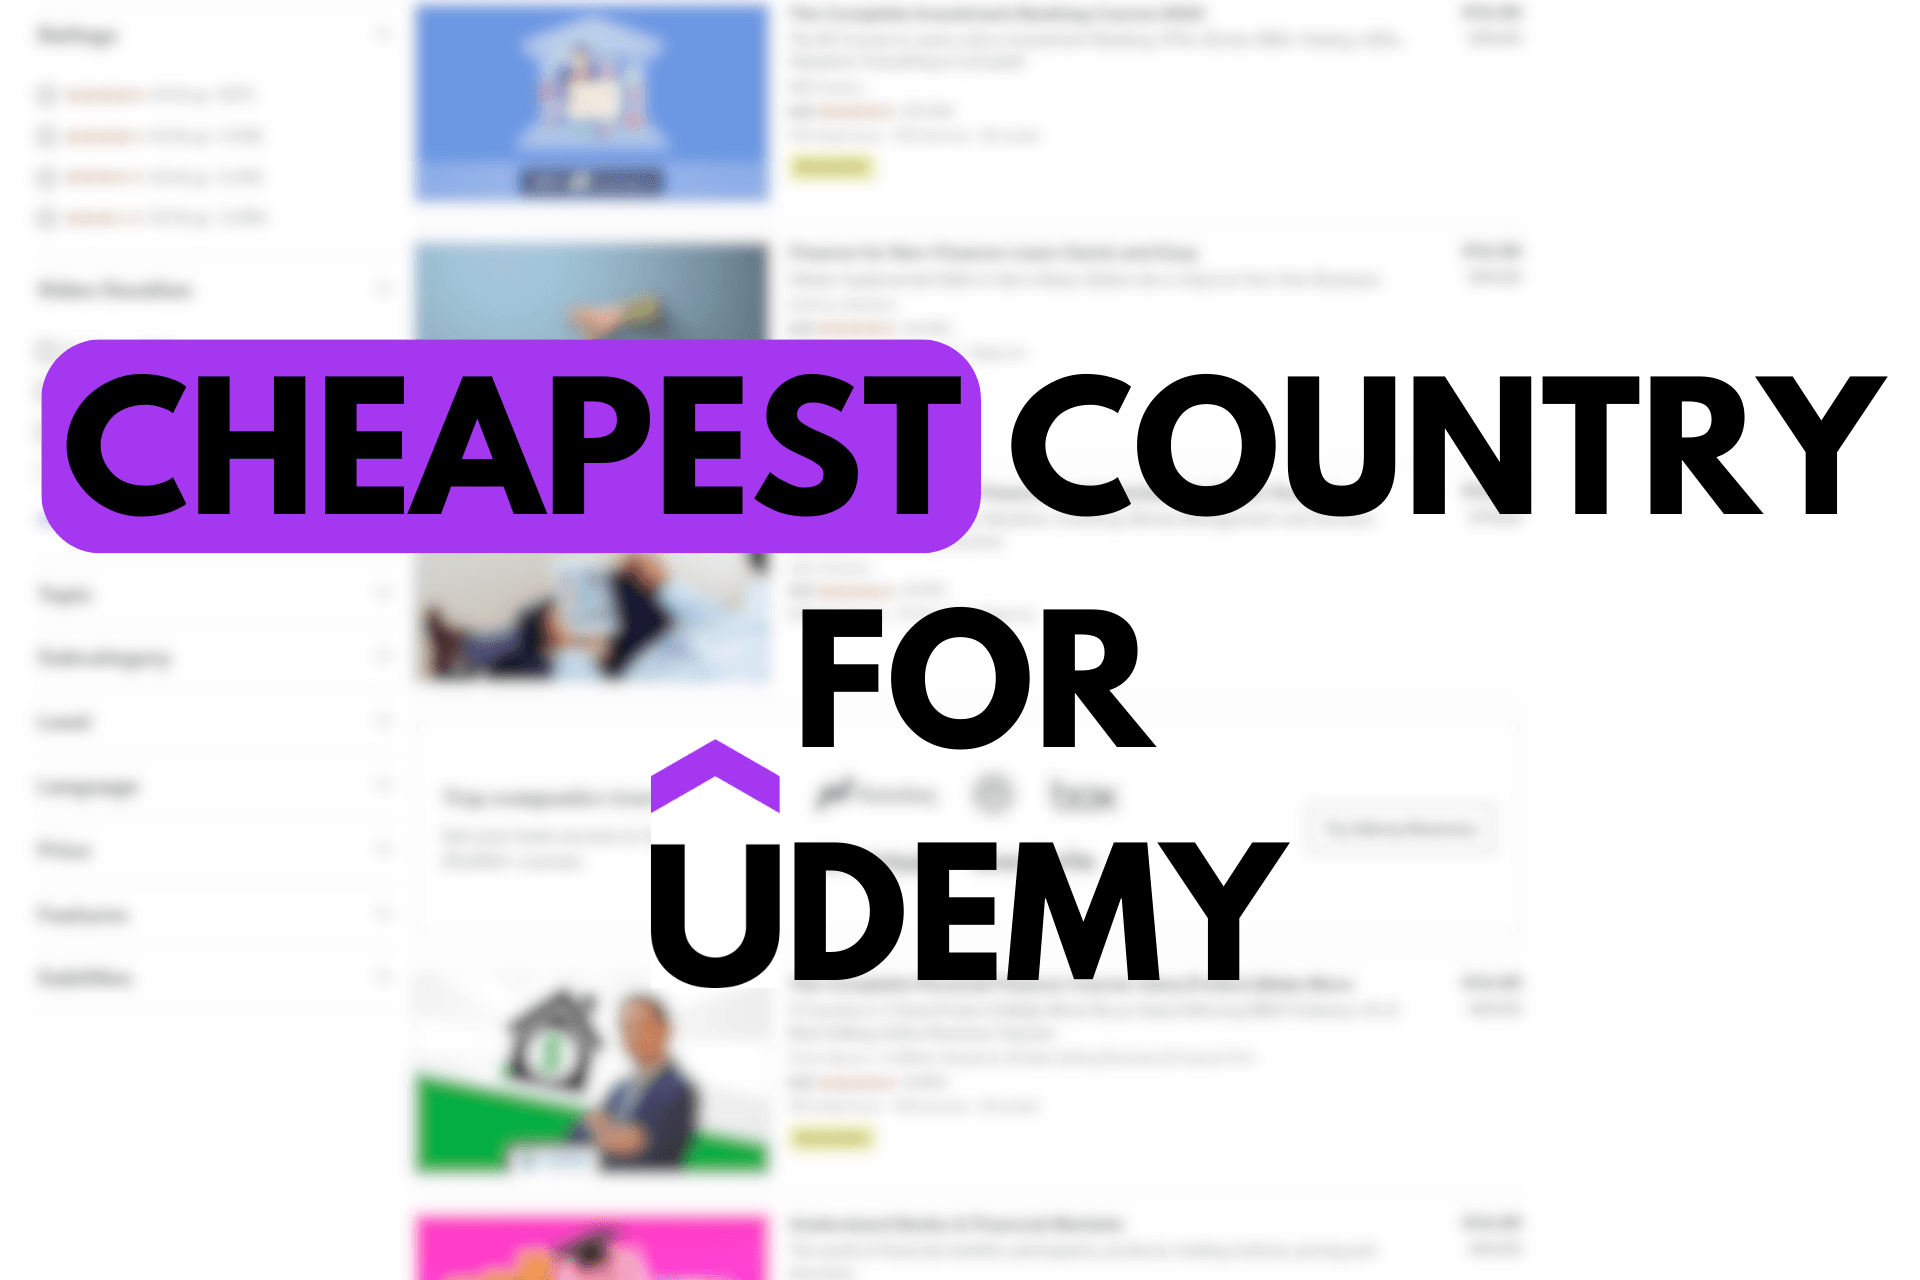 What Is the Cheapest Country for Udemy? [Money-Saving Guide]